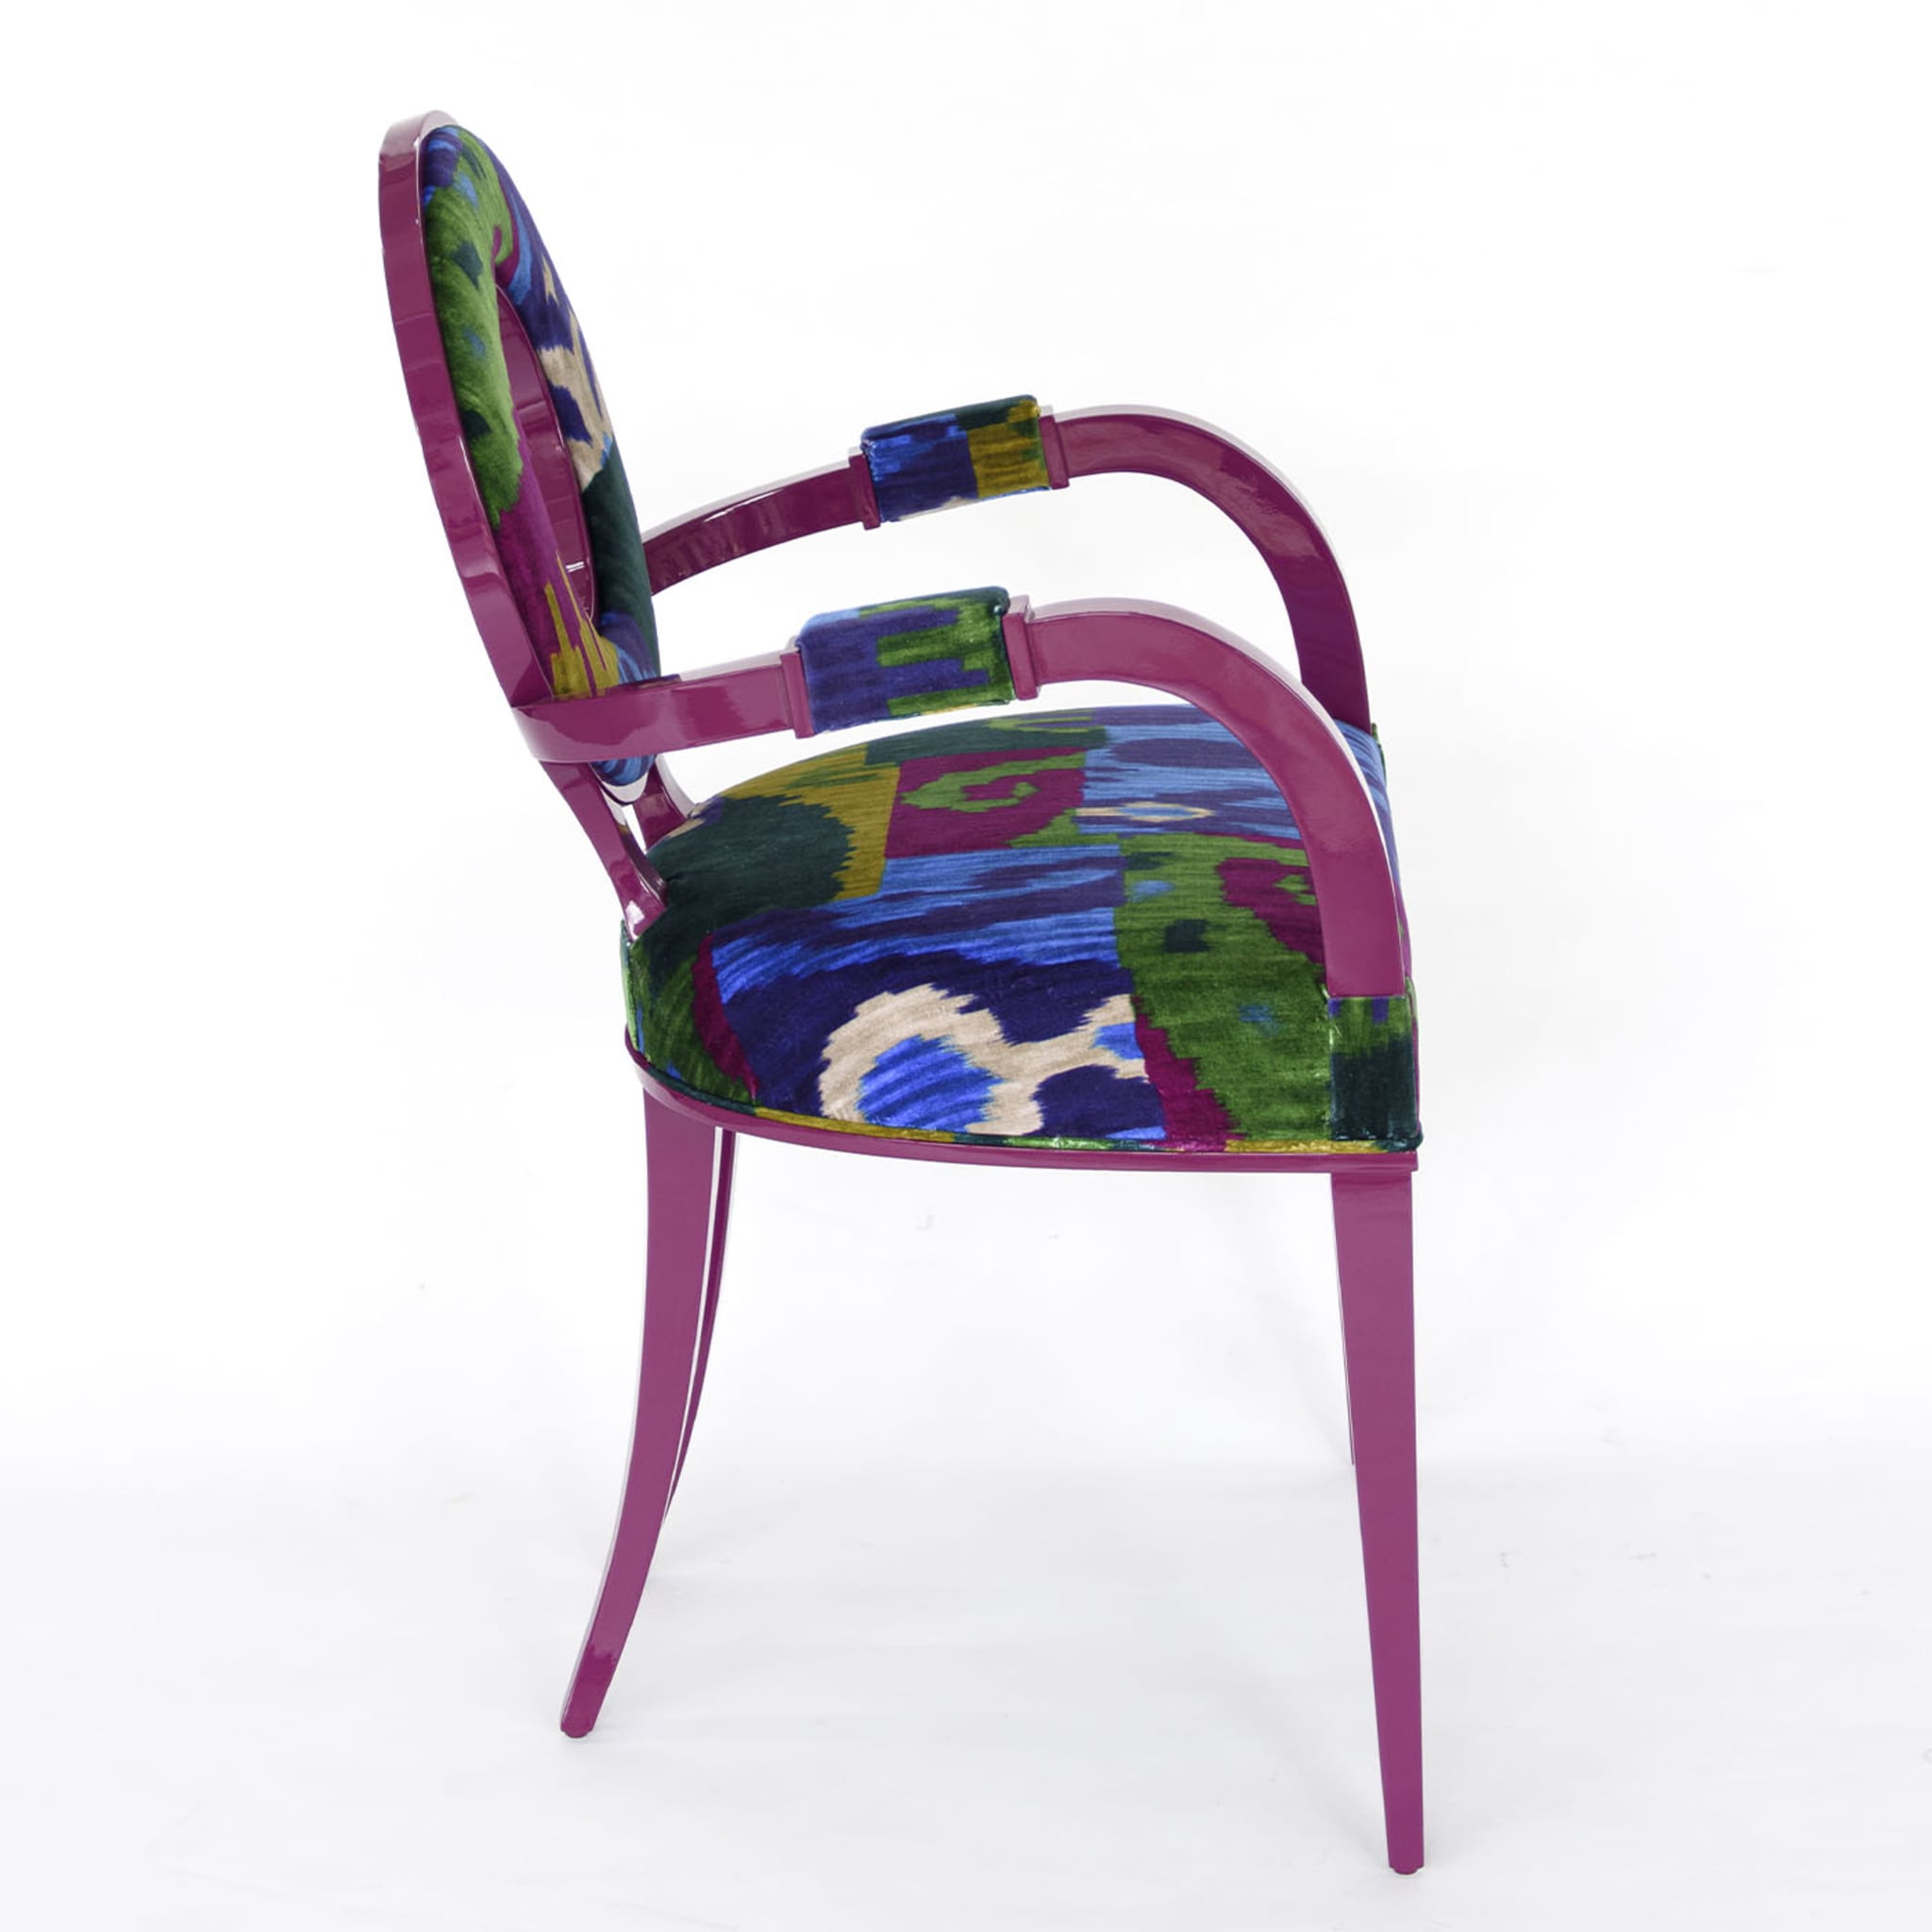 New Moon Magenta Chair With Armrests - Alternative view 3